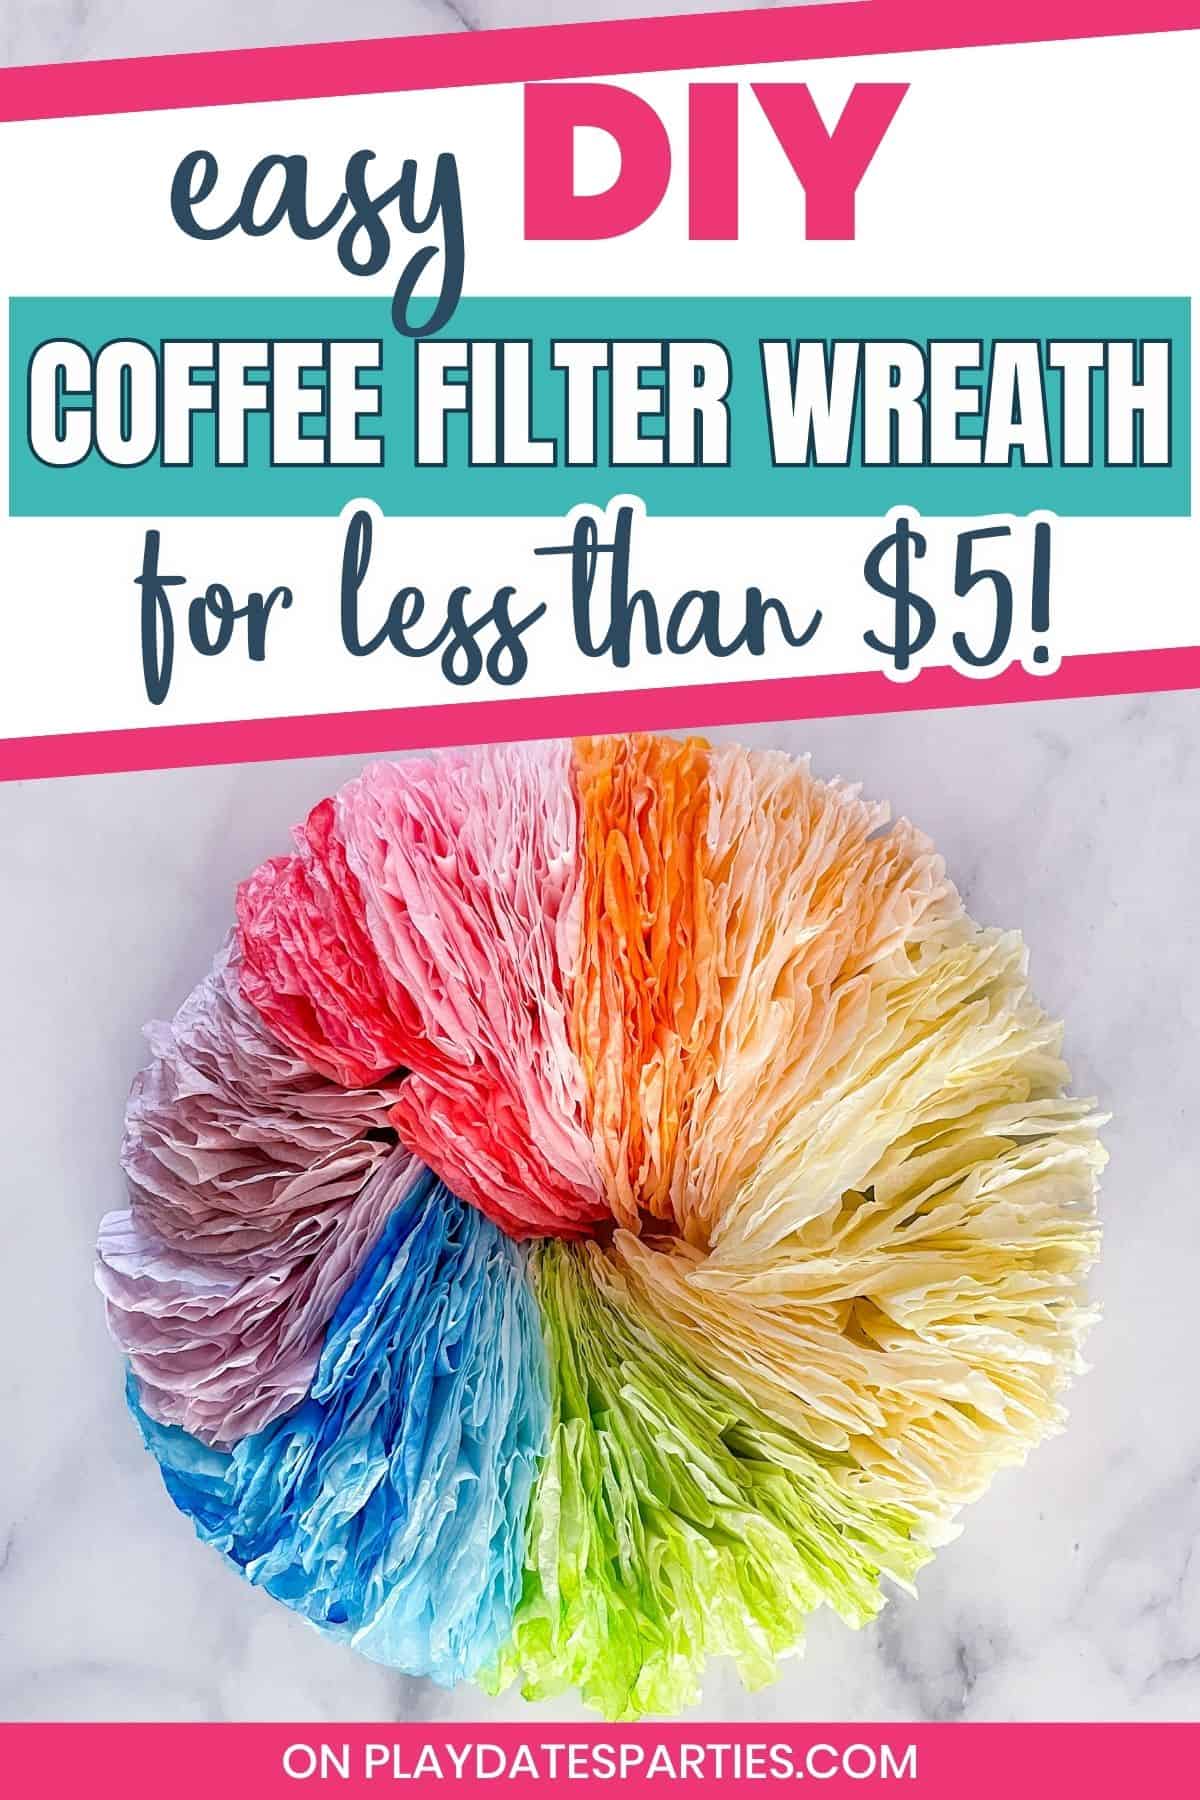 Easy DIY Coffee Filter Wreath for less than 5 dollars Pin Image.